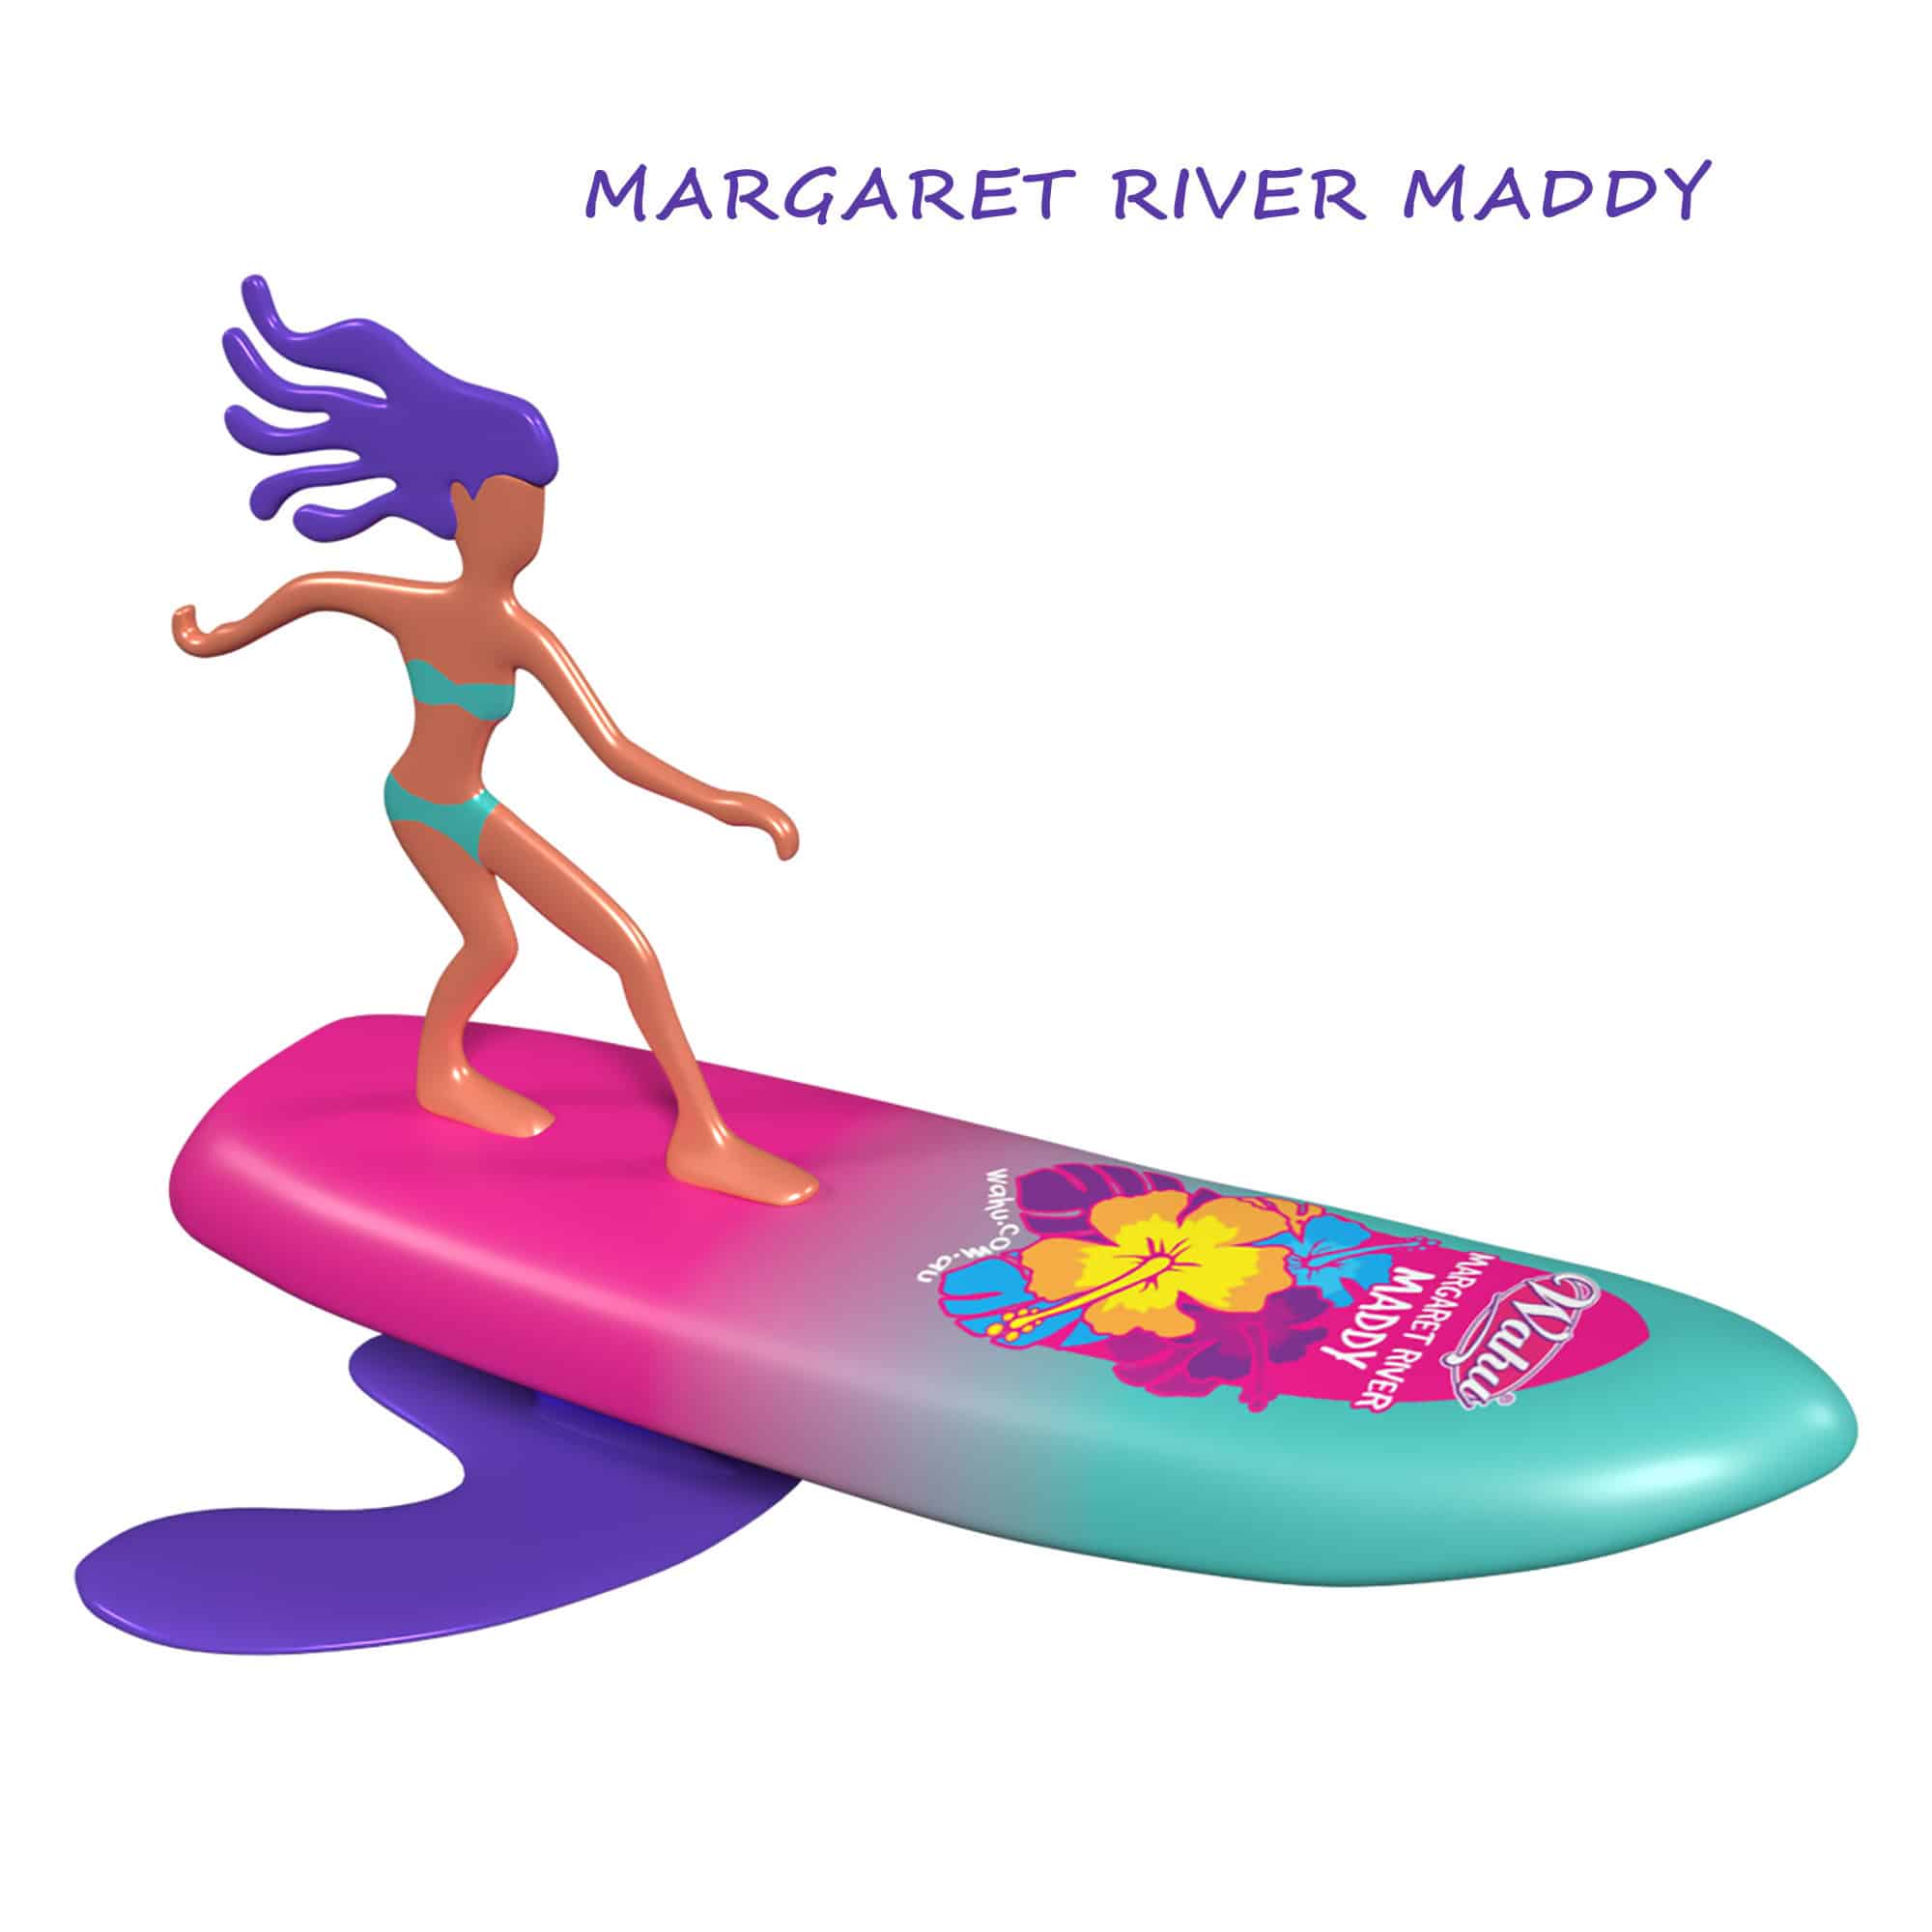 Wahu - Surfer Dudes - Margaret River Maddy